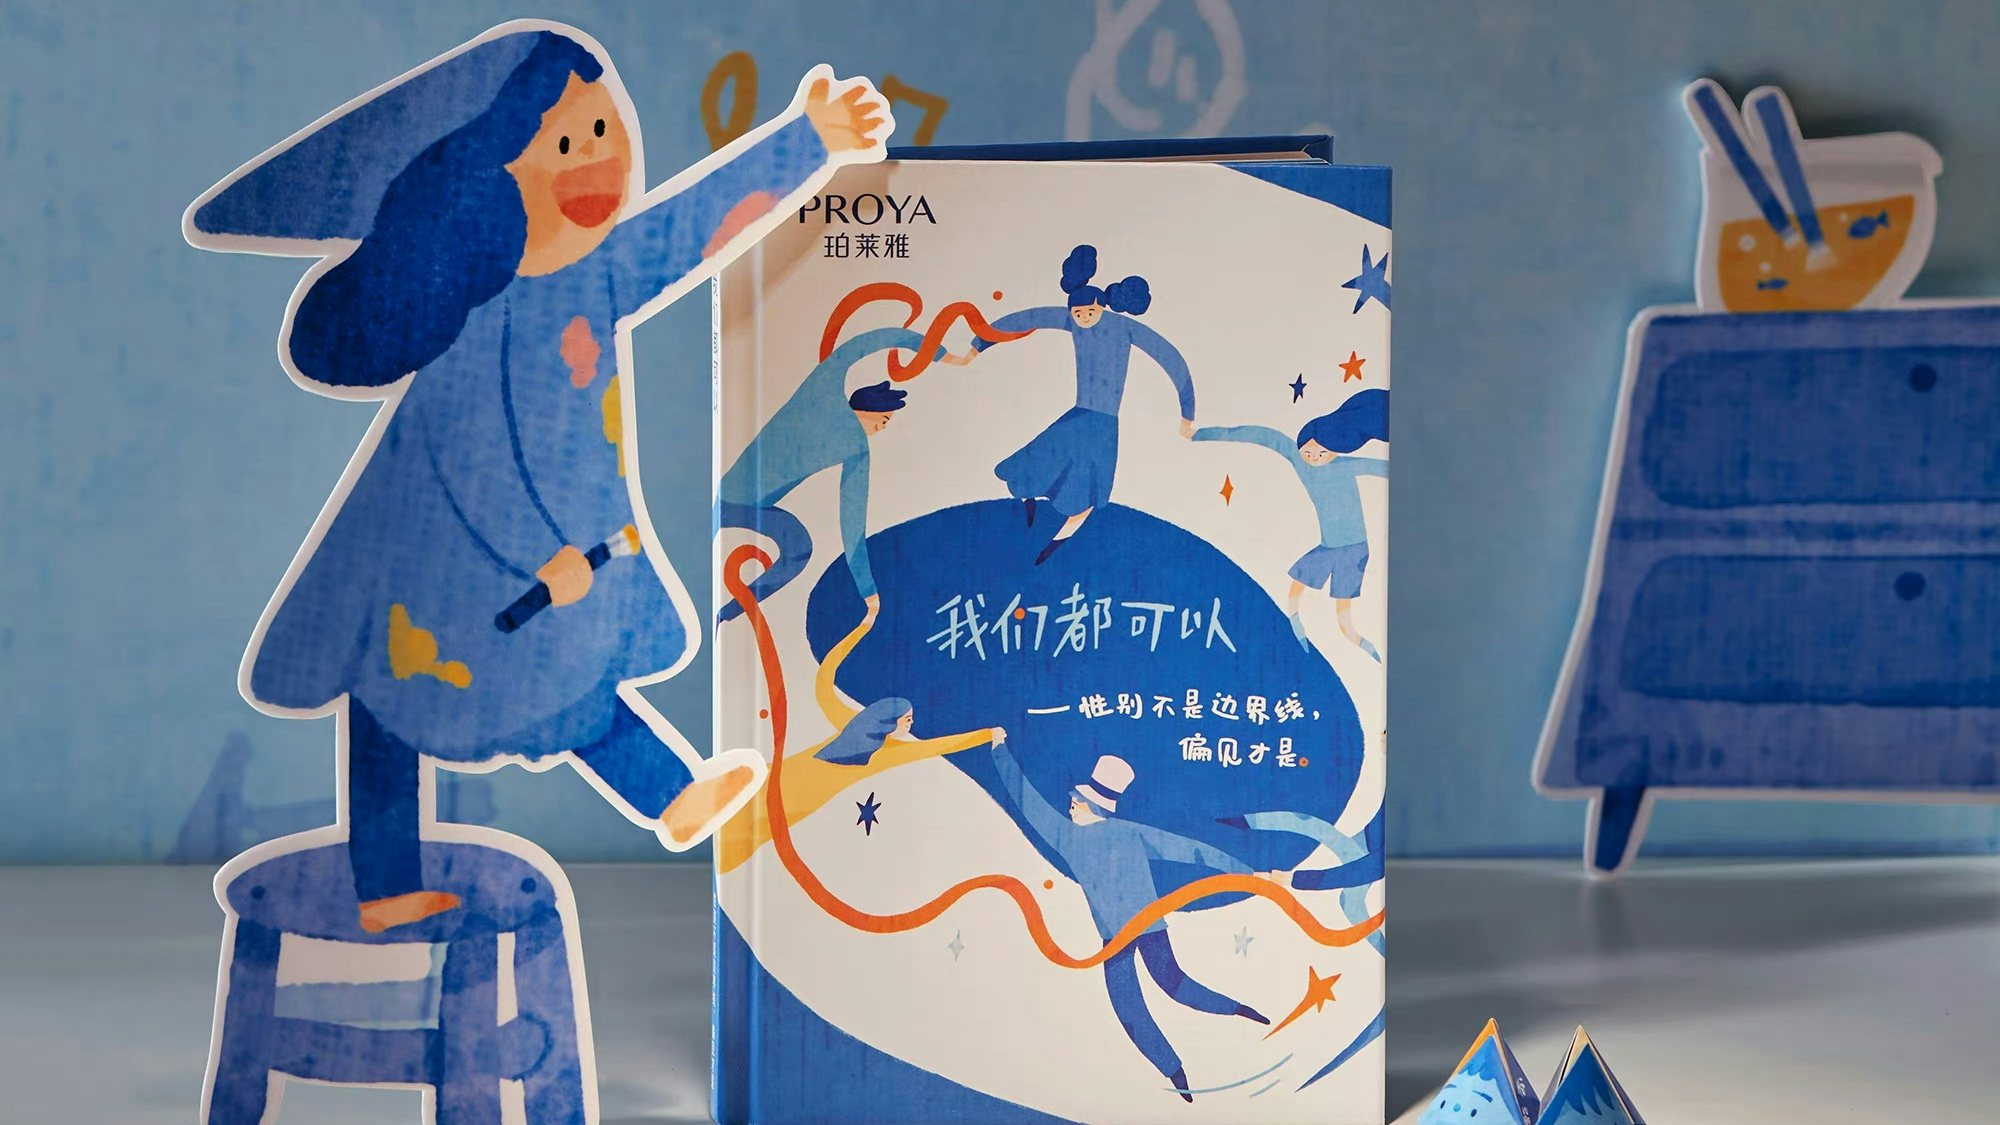 China's Women’s Day on March 8 highlights the unstoppable rise of female consumers. Here’s how brands can effectively tap these opportunities. Photo: Proya